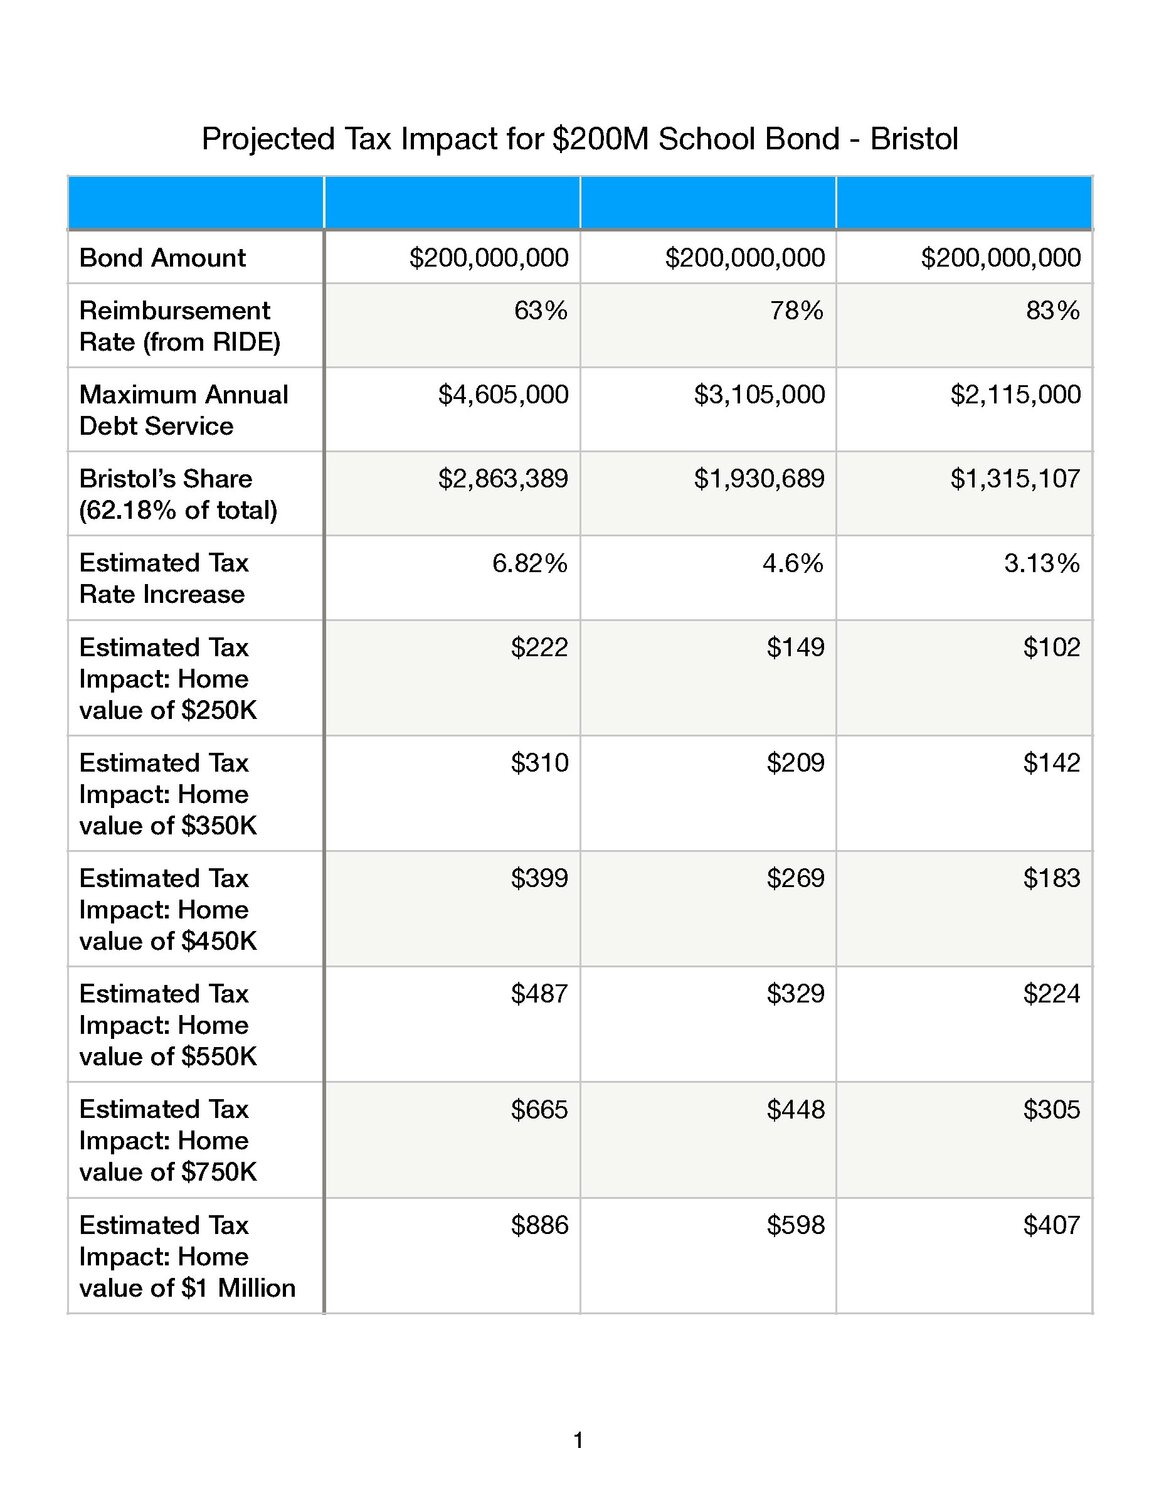 These projections are based on FY23 tax rates and tax levies for Bristol. Impact could be reduced depending on how much revenue Bristol raises from taxes in the coming years. Each column corresponds to a different possible reimbursement rate from RIDE (note: the school district is confident they will receive the maximum 83%).